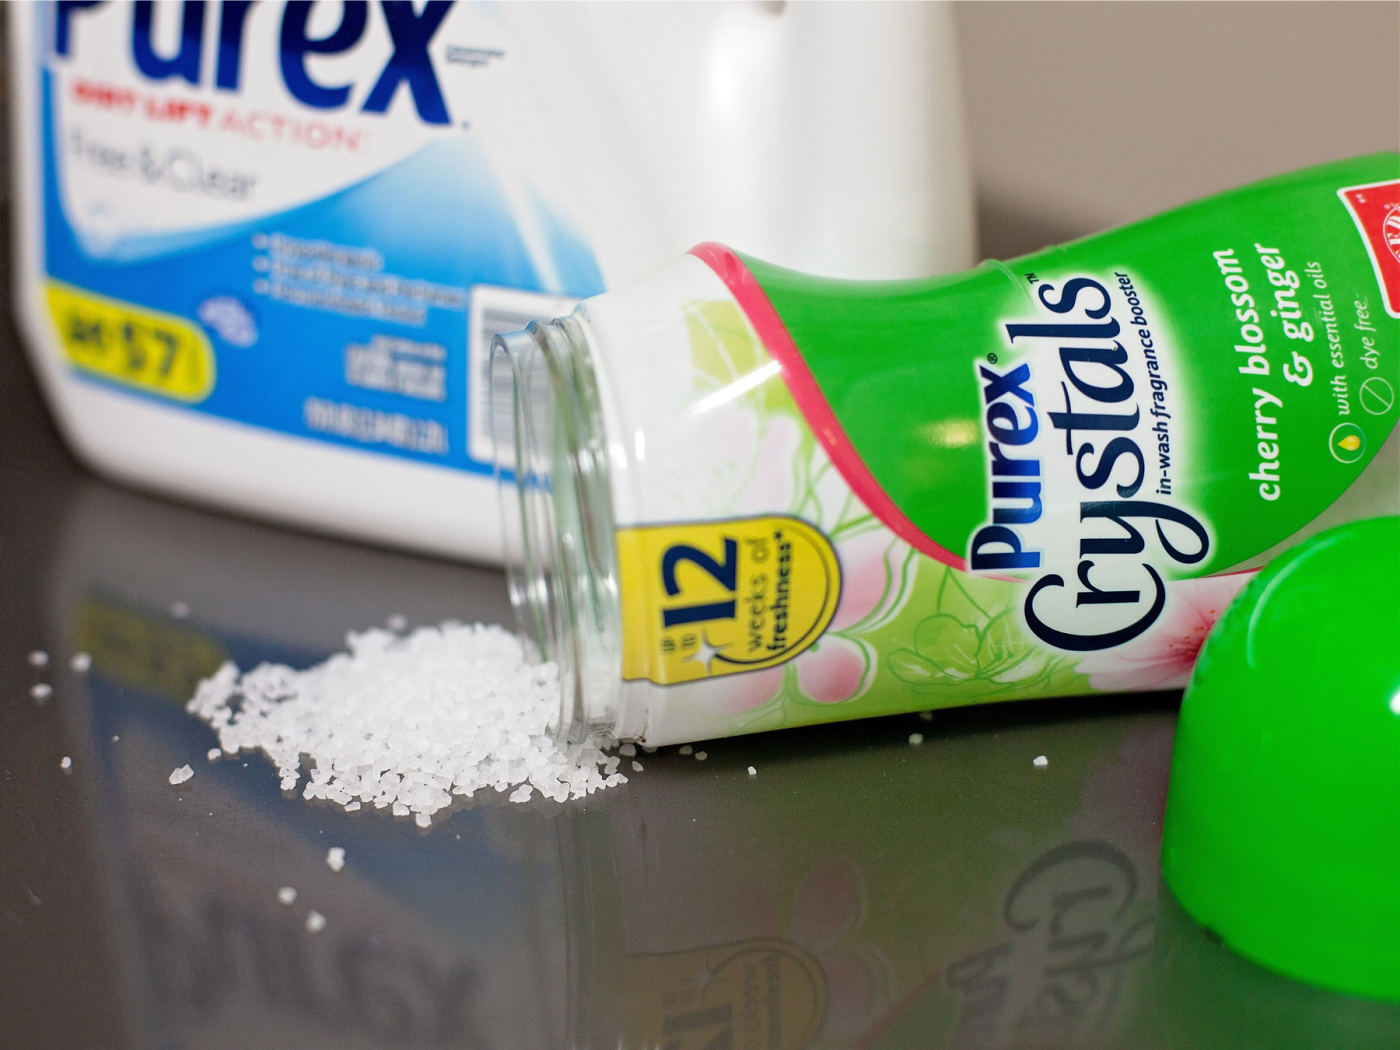 Grab A Bottle Of Purex Crystals In-Wash Fragrance Booster For As Low As $1.15 At Publix